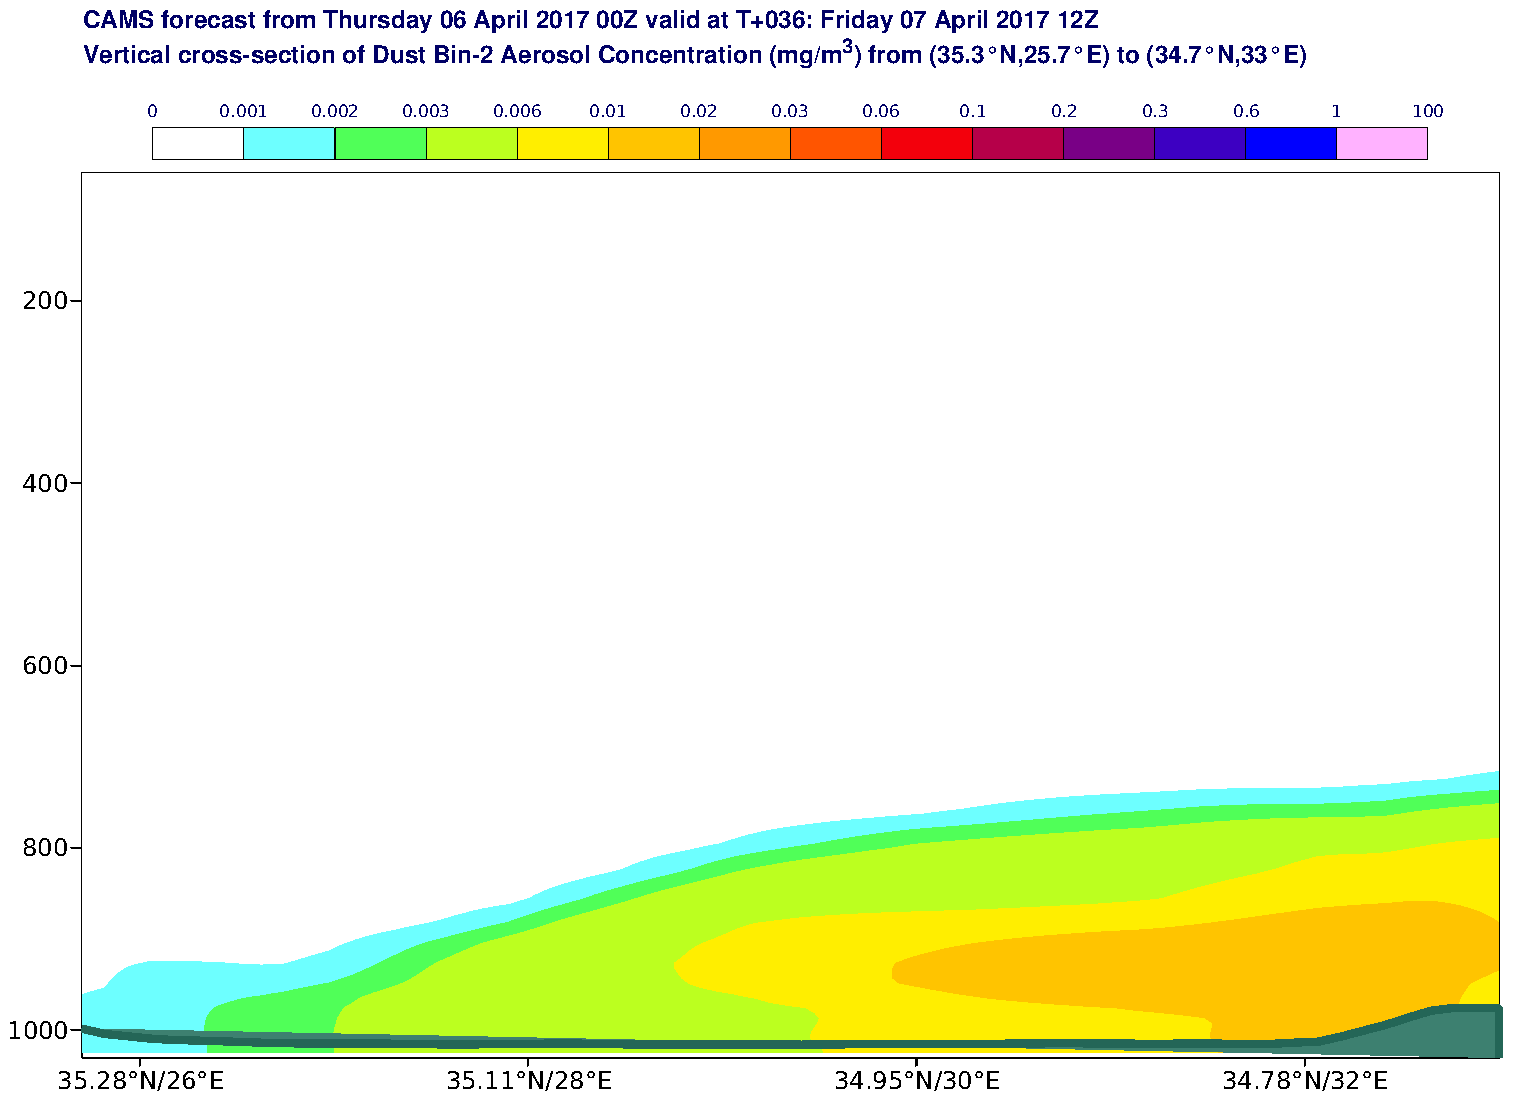 Vertical cross-section of Dust Bin-2 Aerosol Concentration (mg/m3) valid at T36 - 2017-04-07 12:00